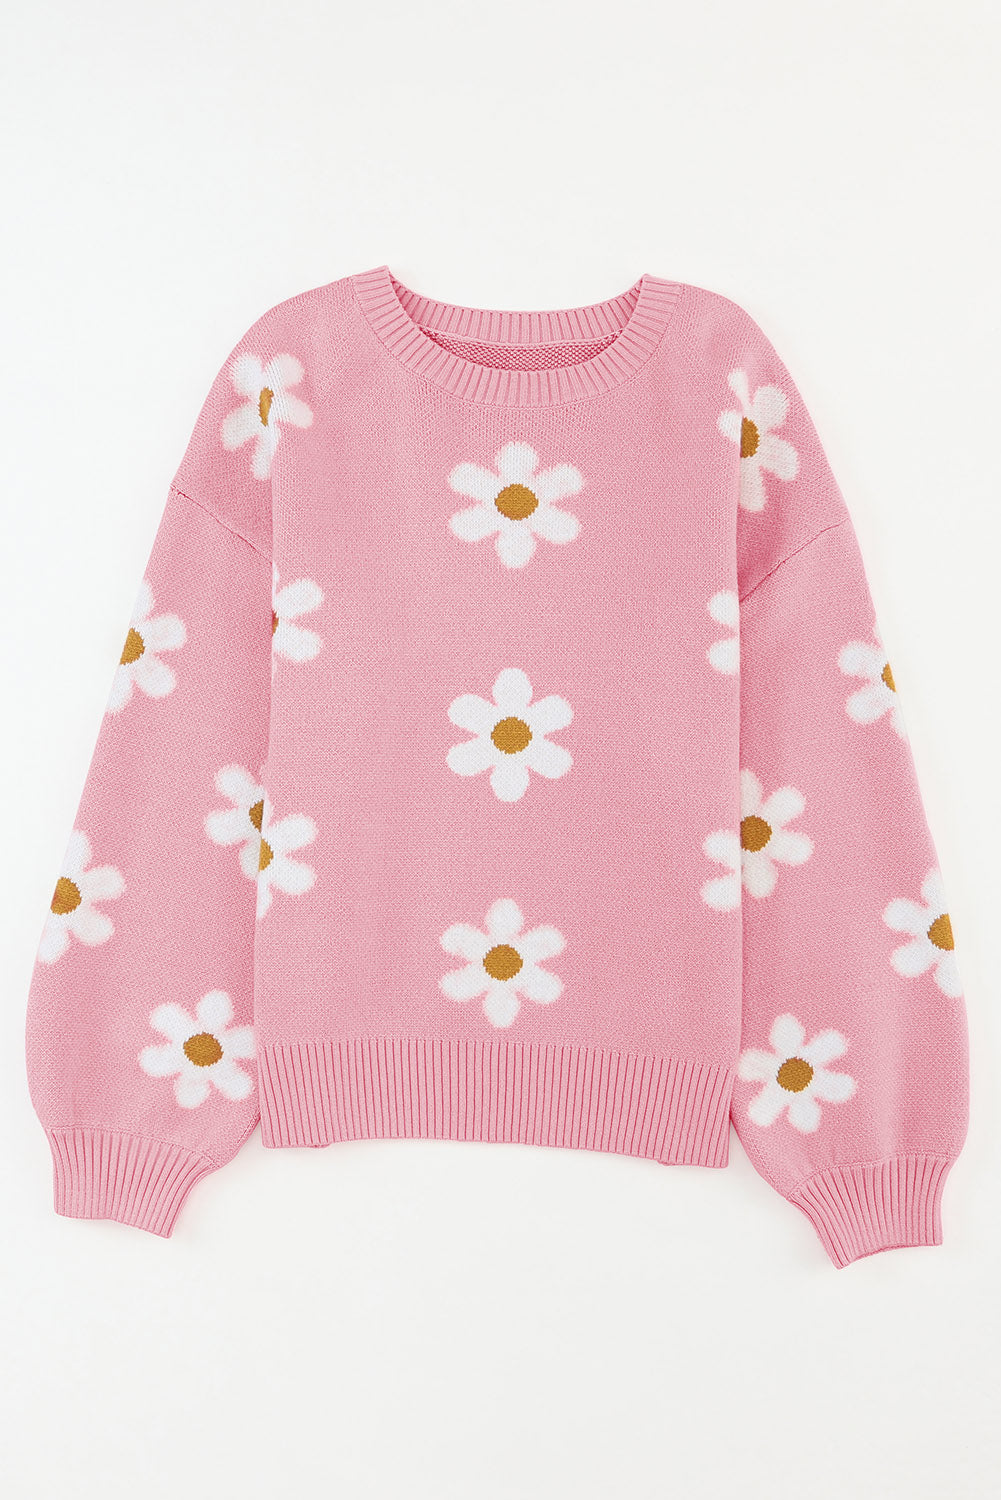 Apricot Floral Pattern Drop Shoulder Pullover Knit Sweater